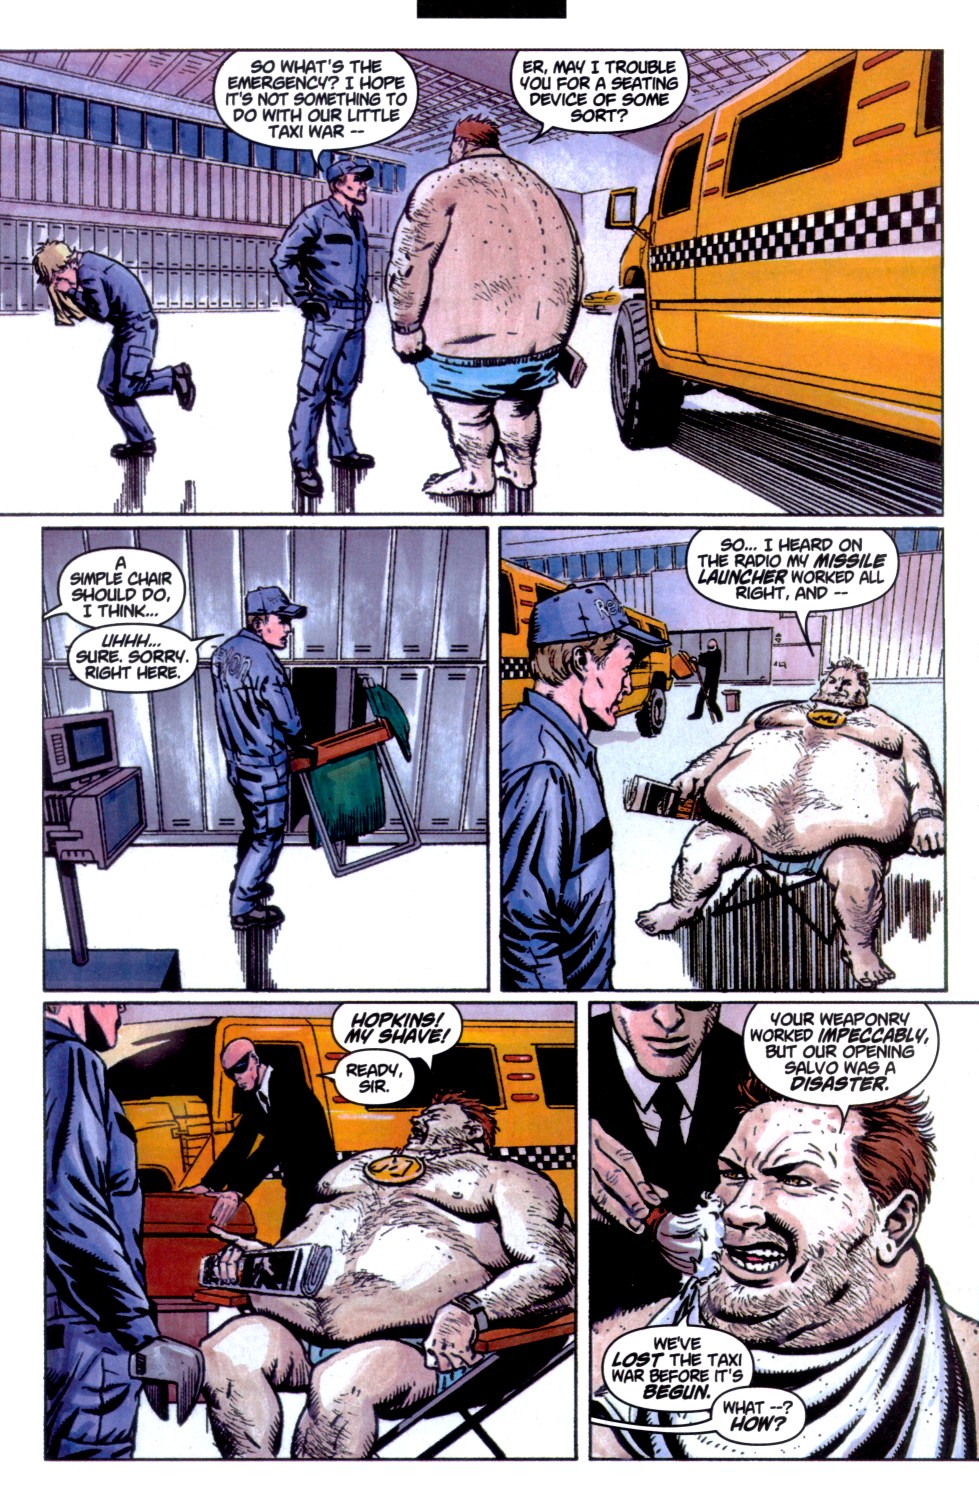 The Punisher (2001) Issue #10 - Taxi Wars #02 - This Makes it Personal! #10 - English 17